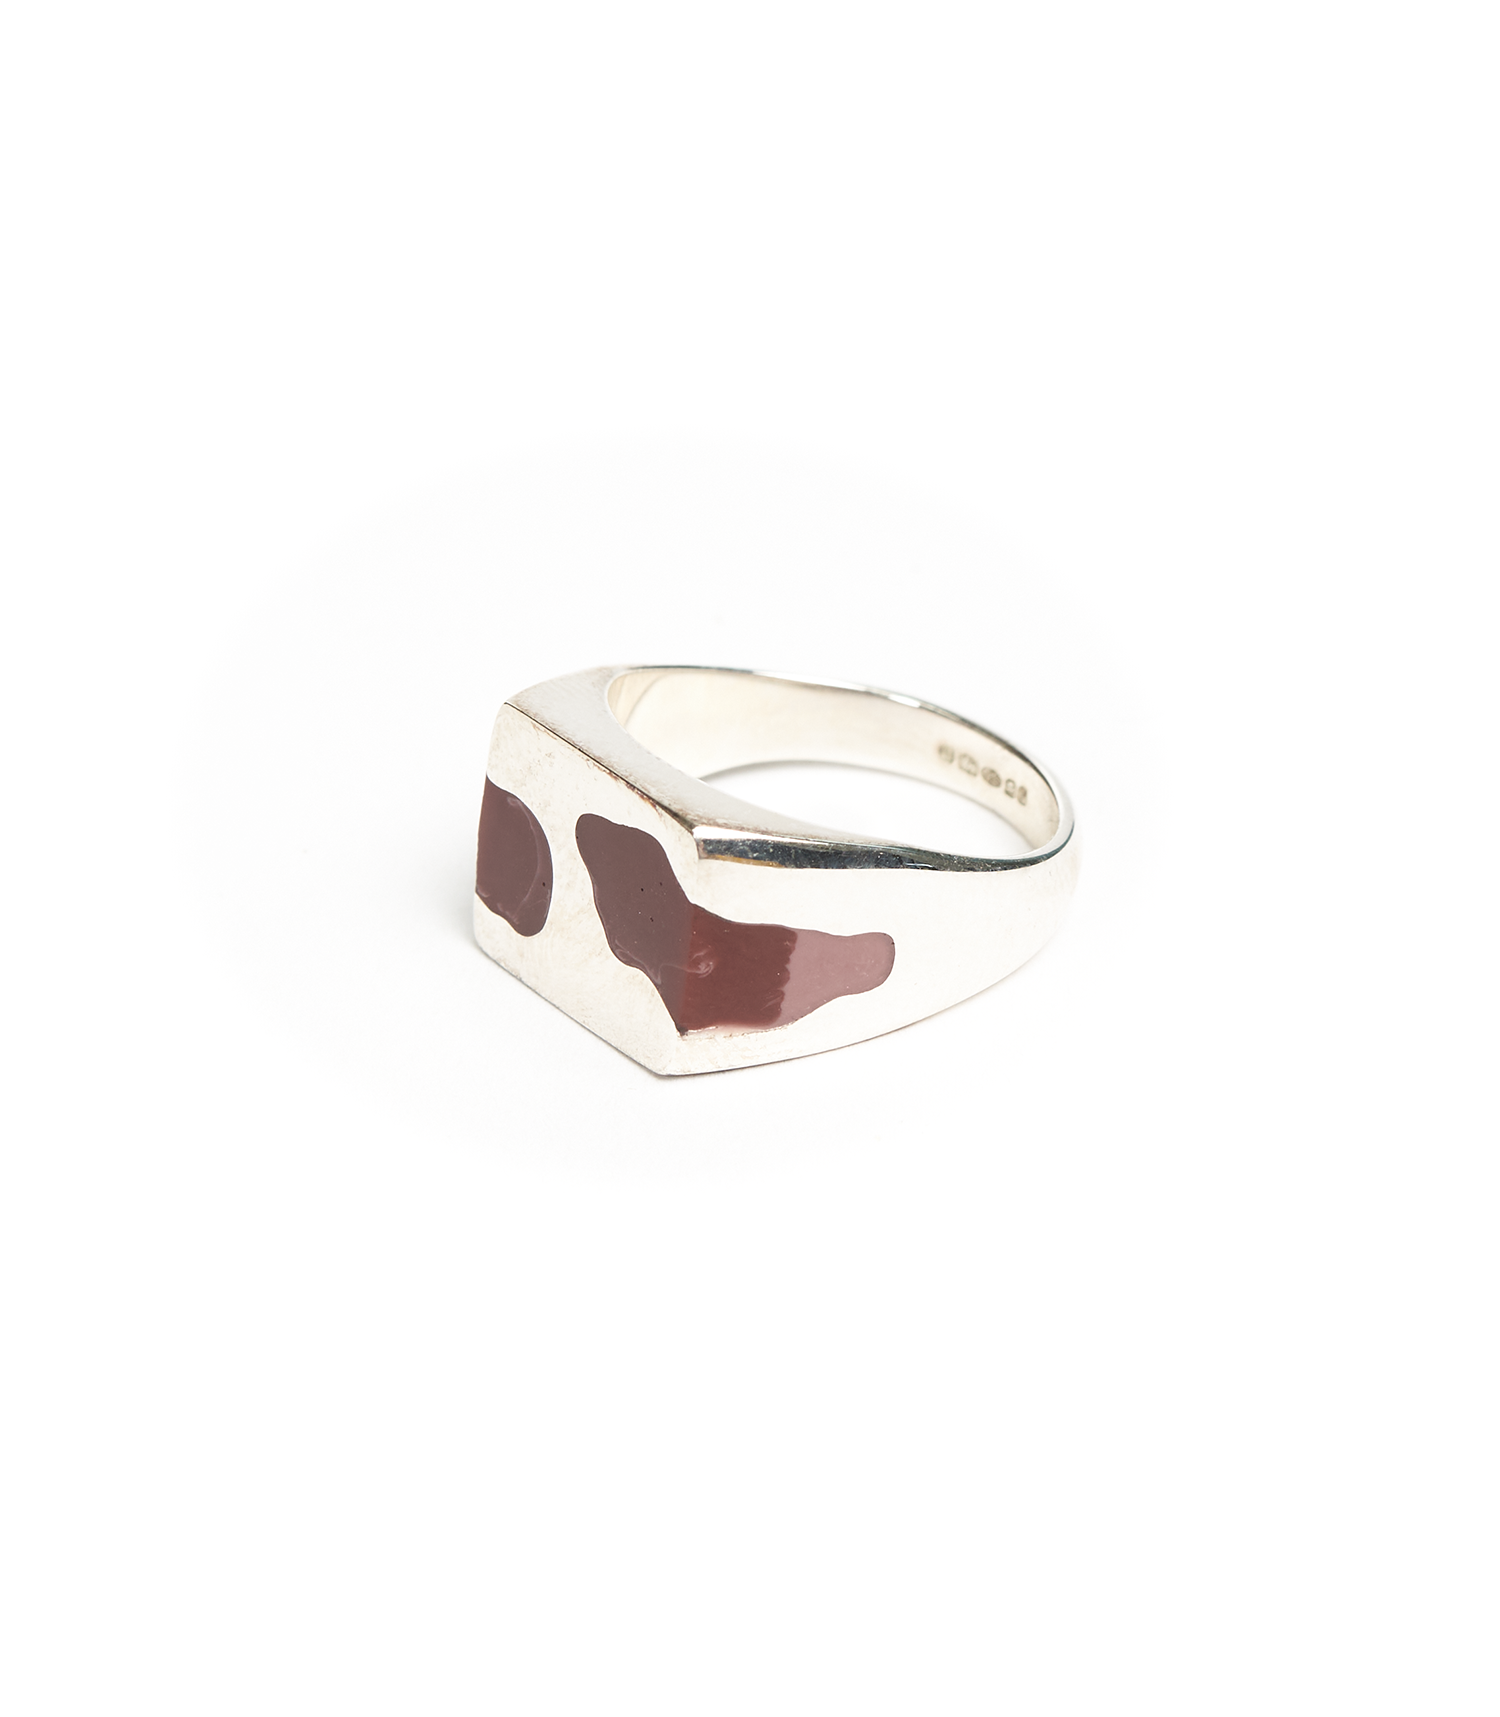 Two Piece Signet Ring - 925 Sterling Silver / Brown Resin